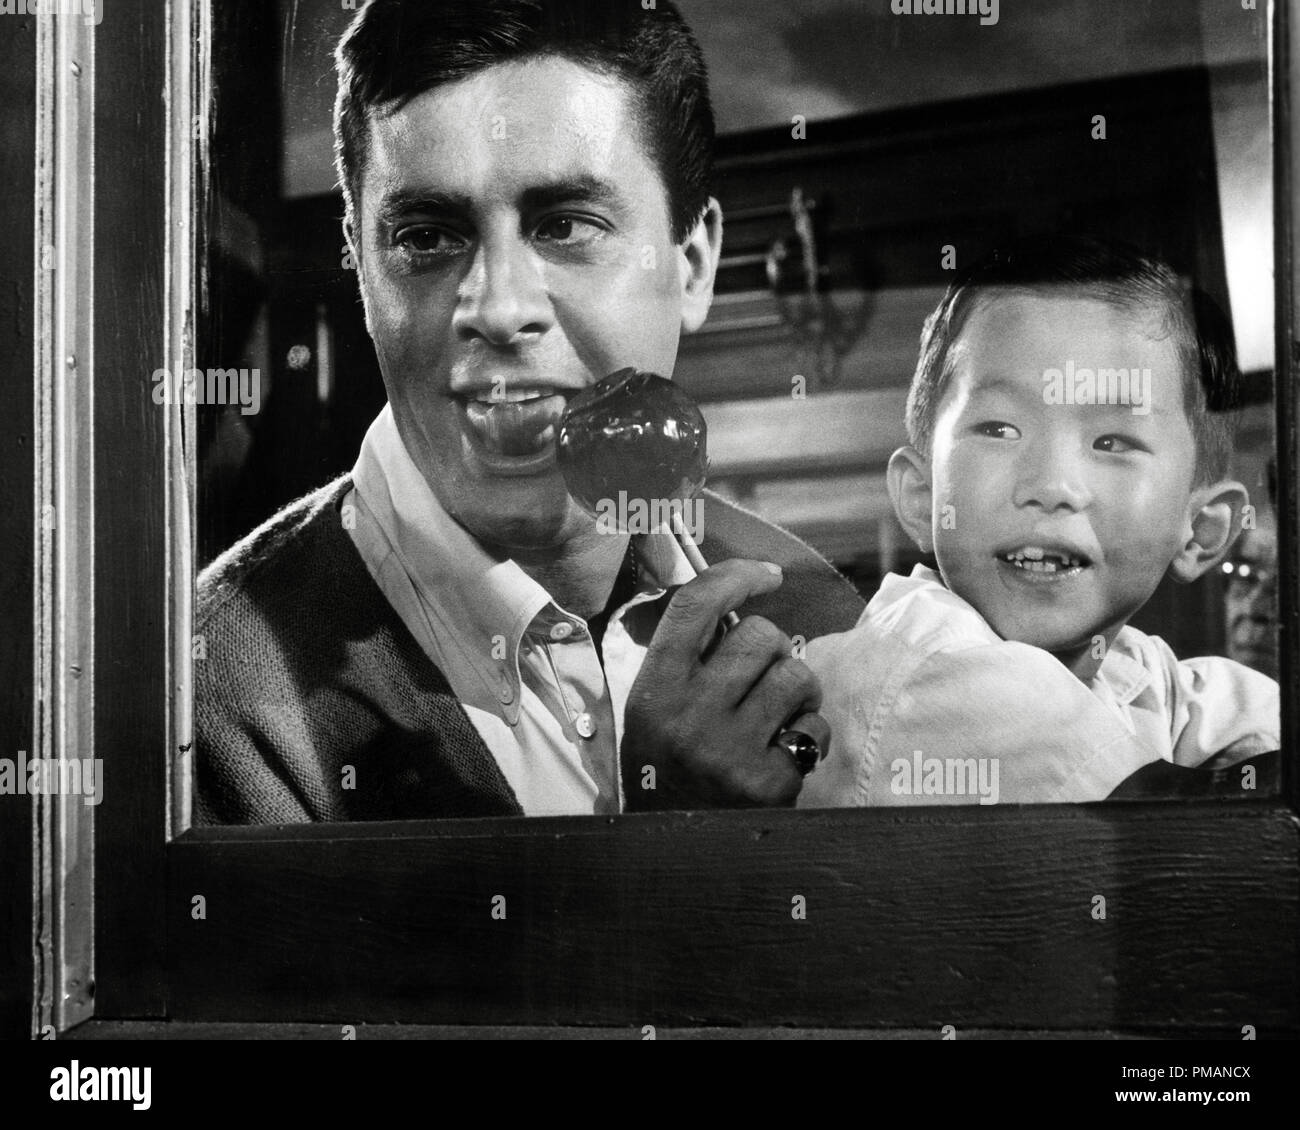 Film Still/Publicity Still of 'Geisha Boy' Jerry Lewis 1958 Paramount  Cinema Publishers Collection - No Release - For Editorial Use Only File Reference # 33505 525THA Stock Photo